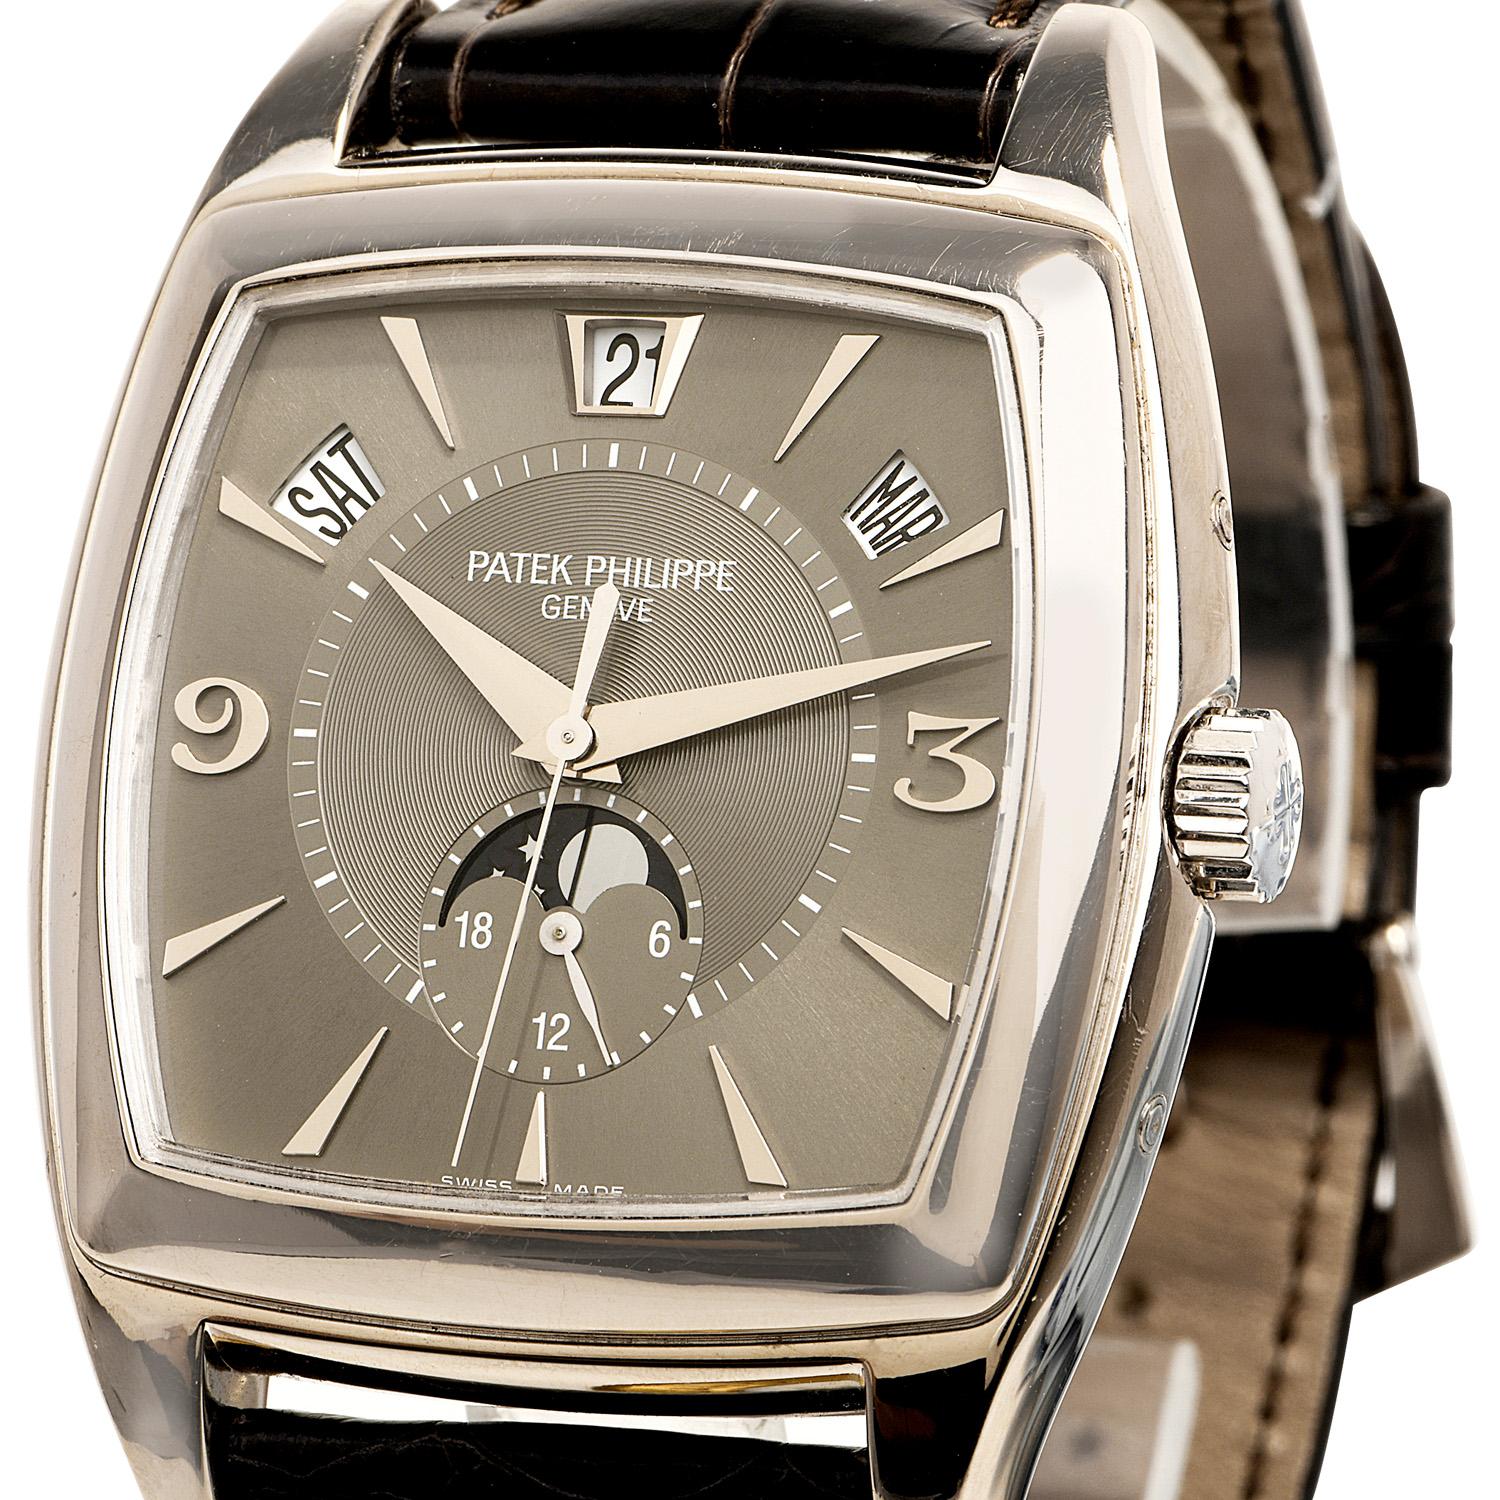 Patek Philippe 5135 G 18K White Gold Men's Watch with Certificate

Brand/Designer: Patek Philippe

Model Name: Gondolo

Reference Number: 5135

Serial Number: 3.423.216

Gender: Men's

Movement: Automatic (self-winding)

Case Material: 18K White